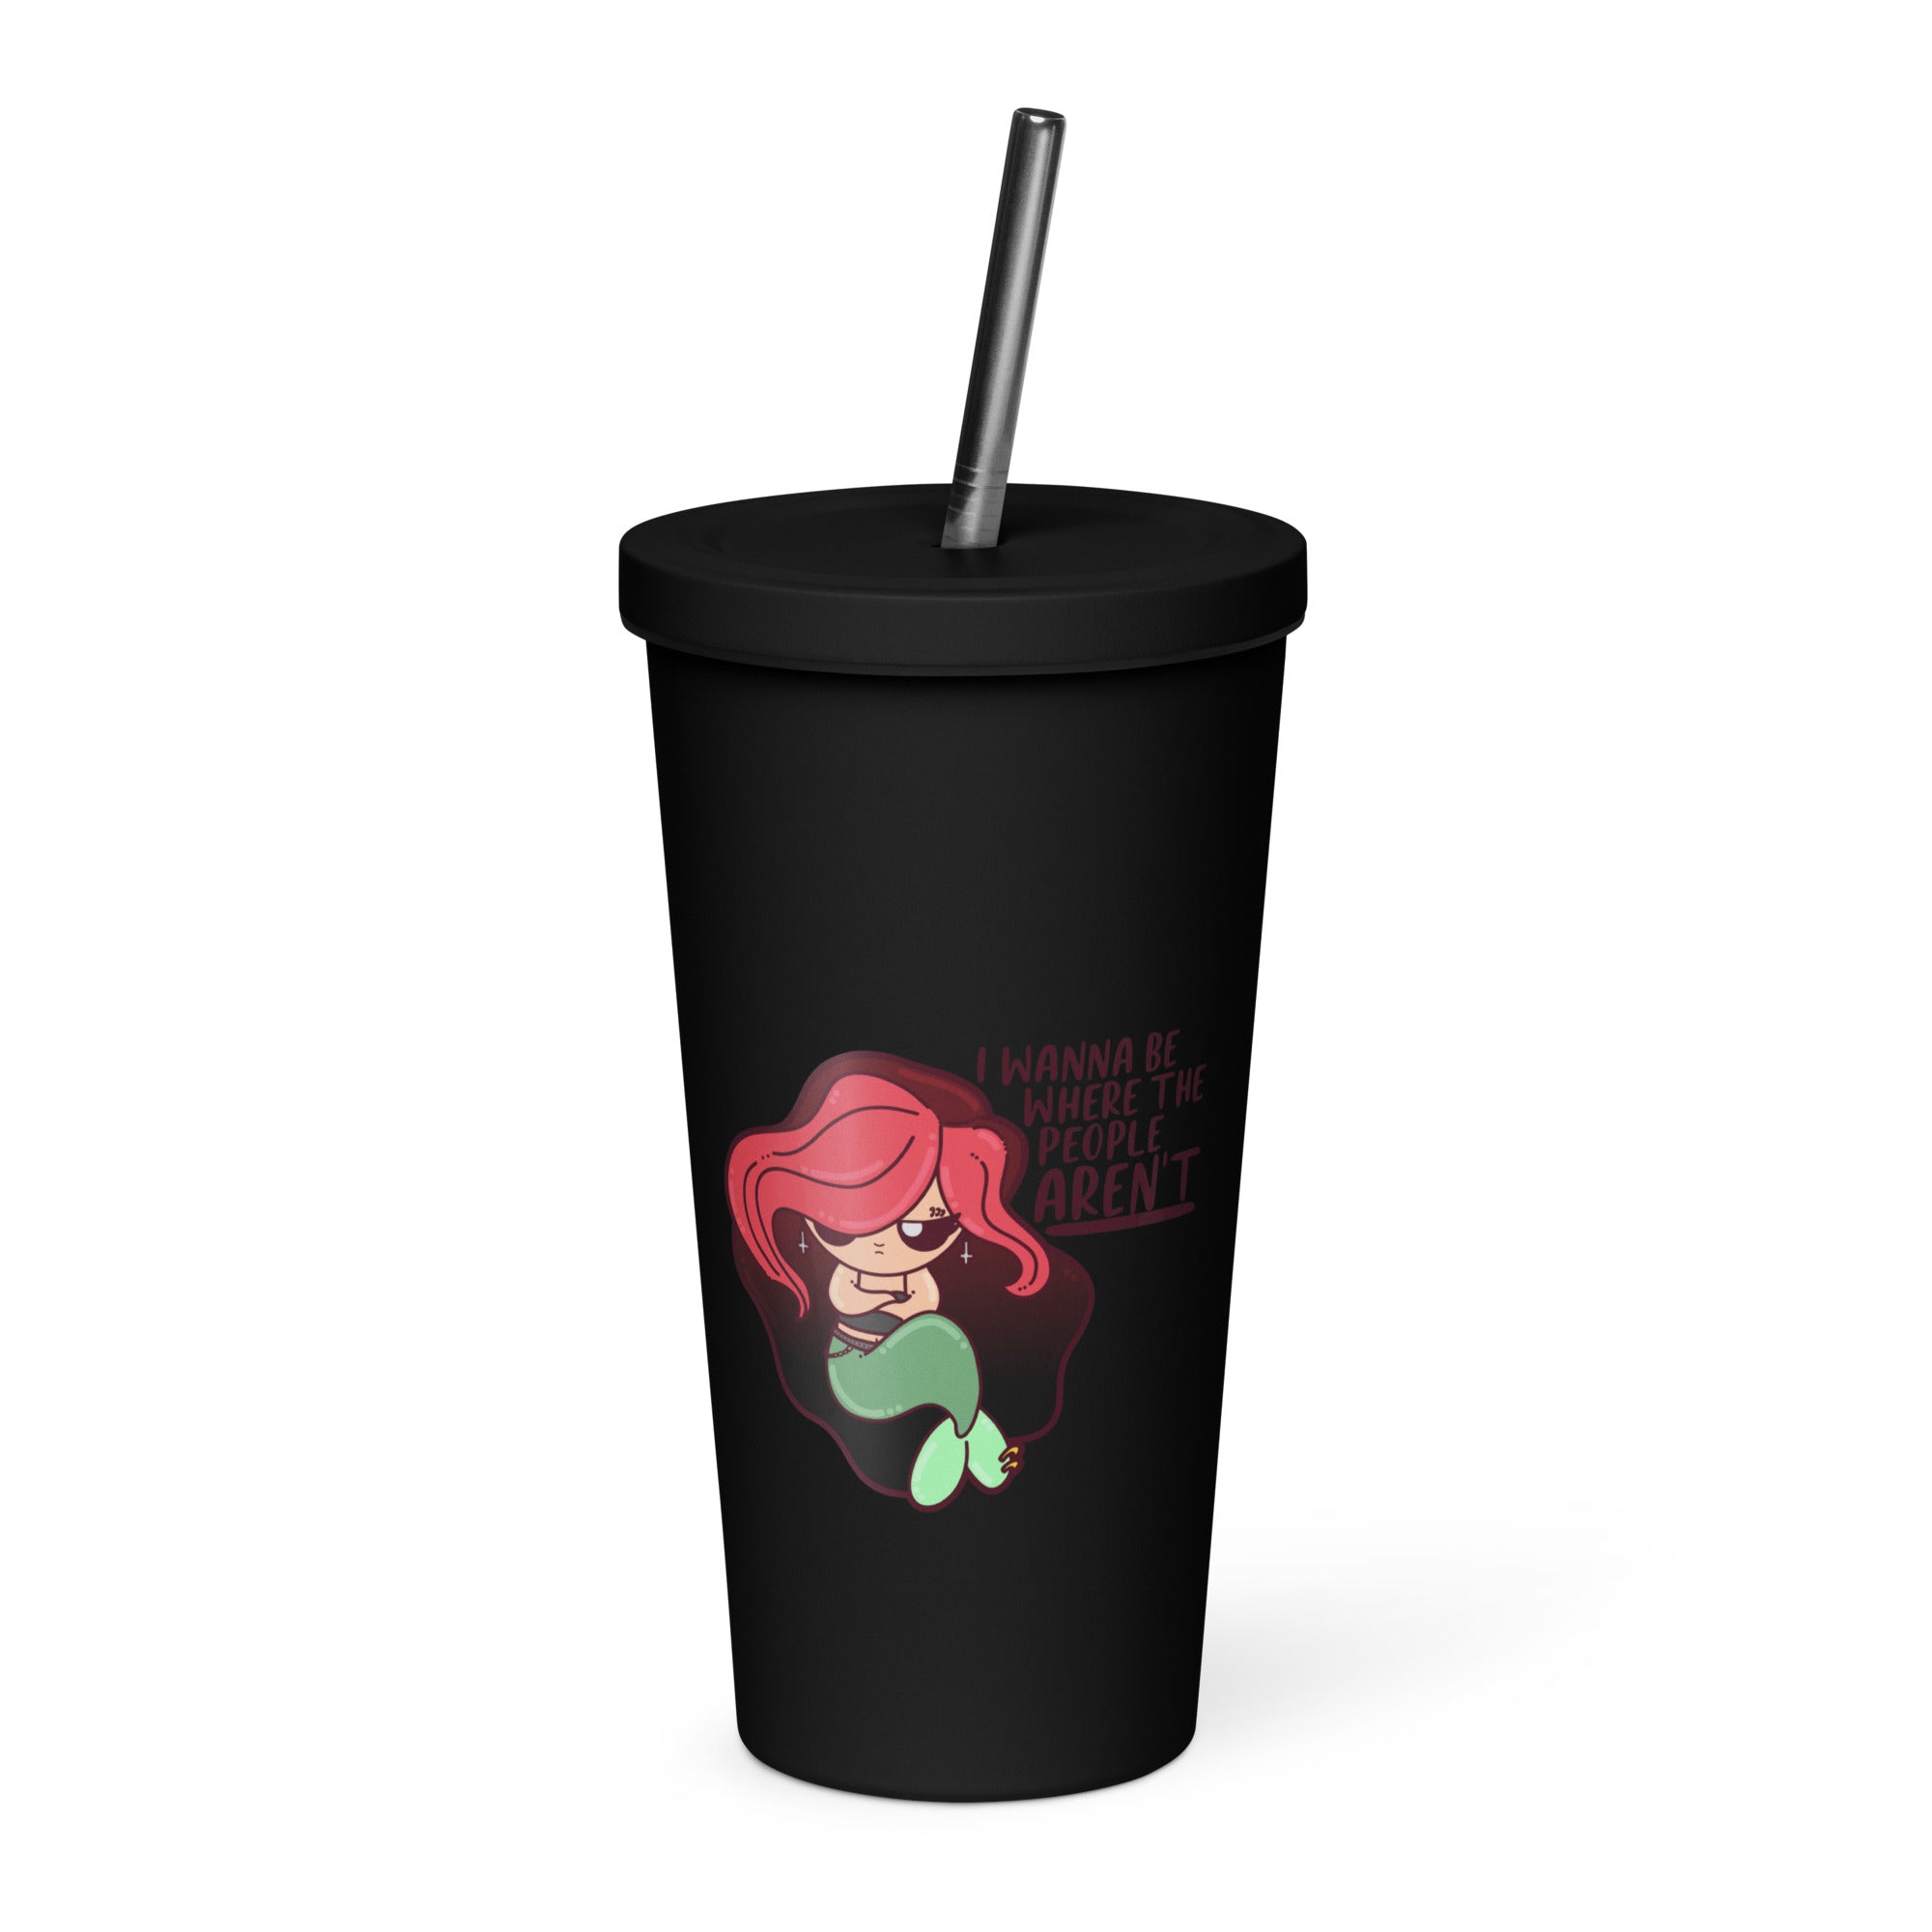 I WANNA BE WHERE THE PEOPLE ARENT - Insulated Tumbler - ChubbleGumLLC